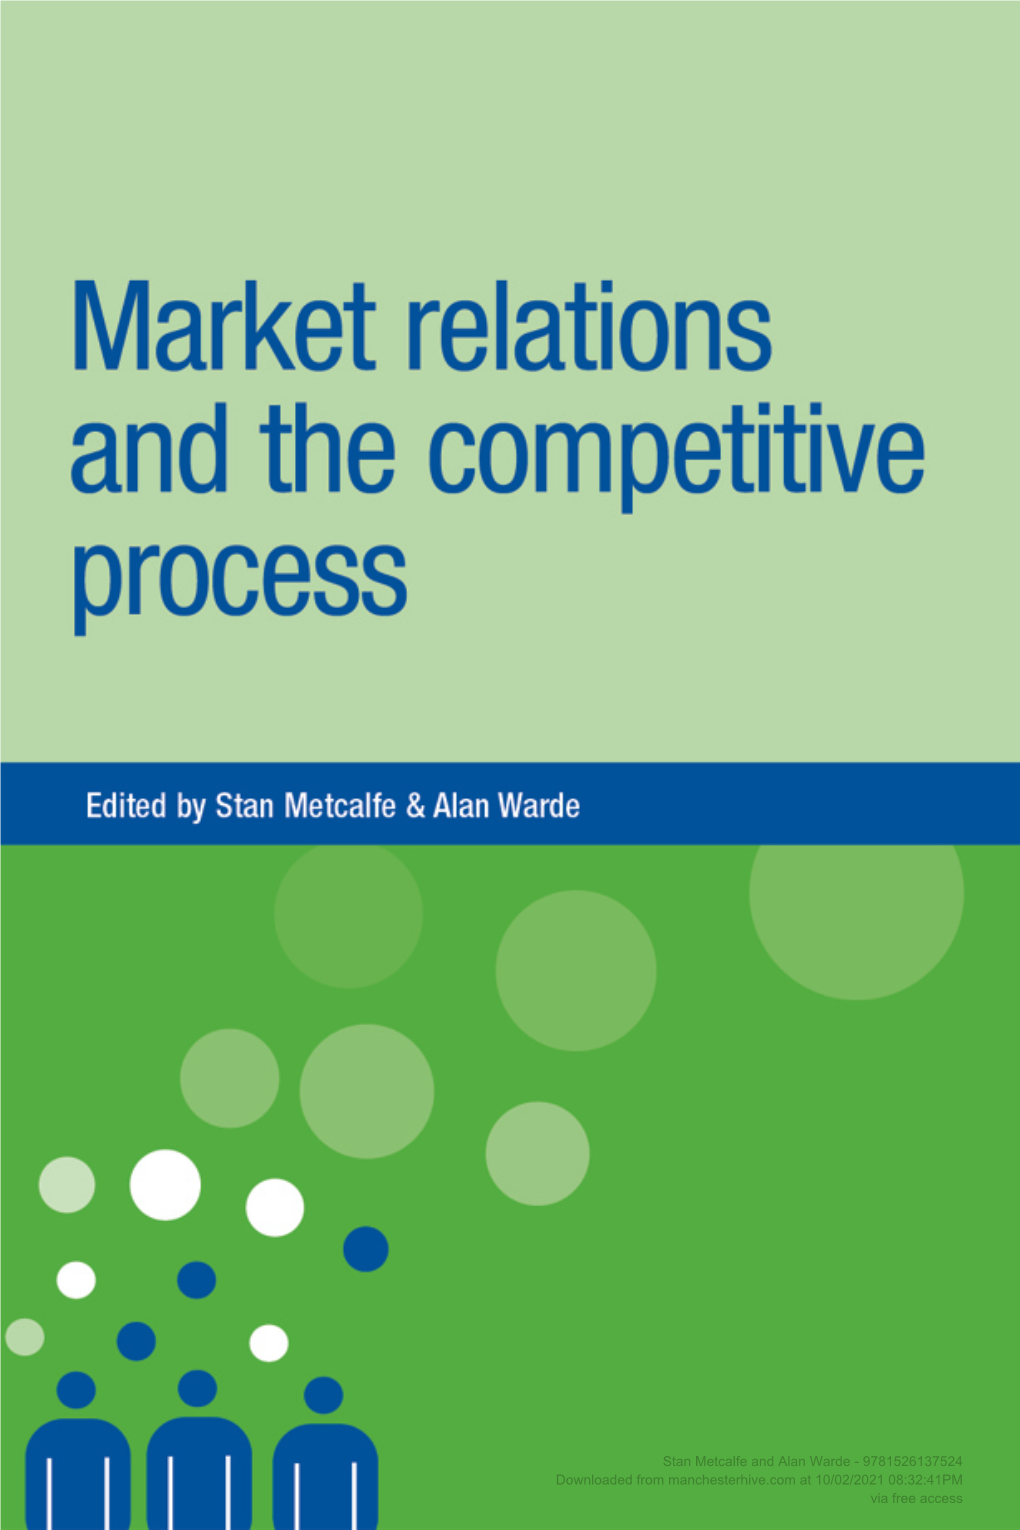 Stan Metcalfe and Alan Warde - 9781526137524 Downloaded from Manchesterhive.Com at 10/02/2021 08:32:41PM Via Free Access Market Relations and the Competitive Process